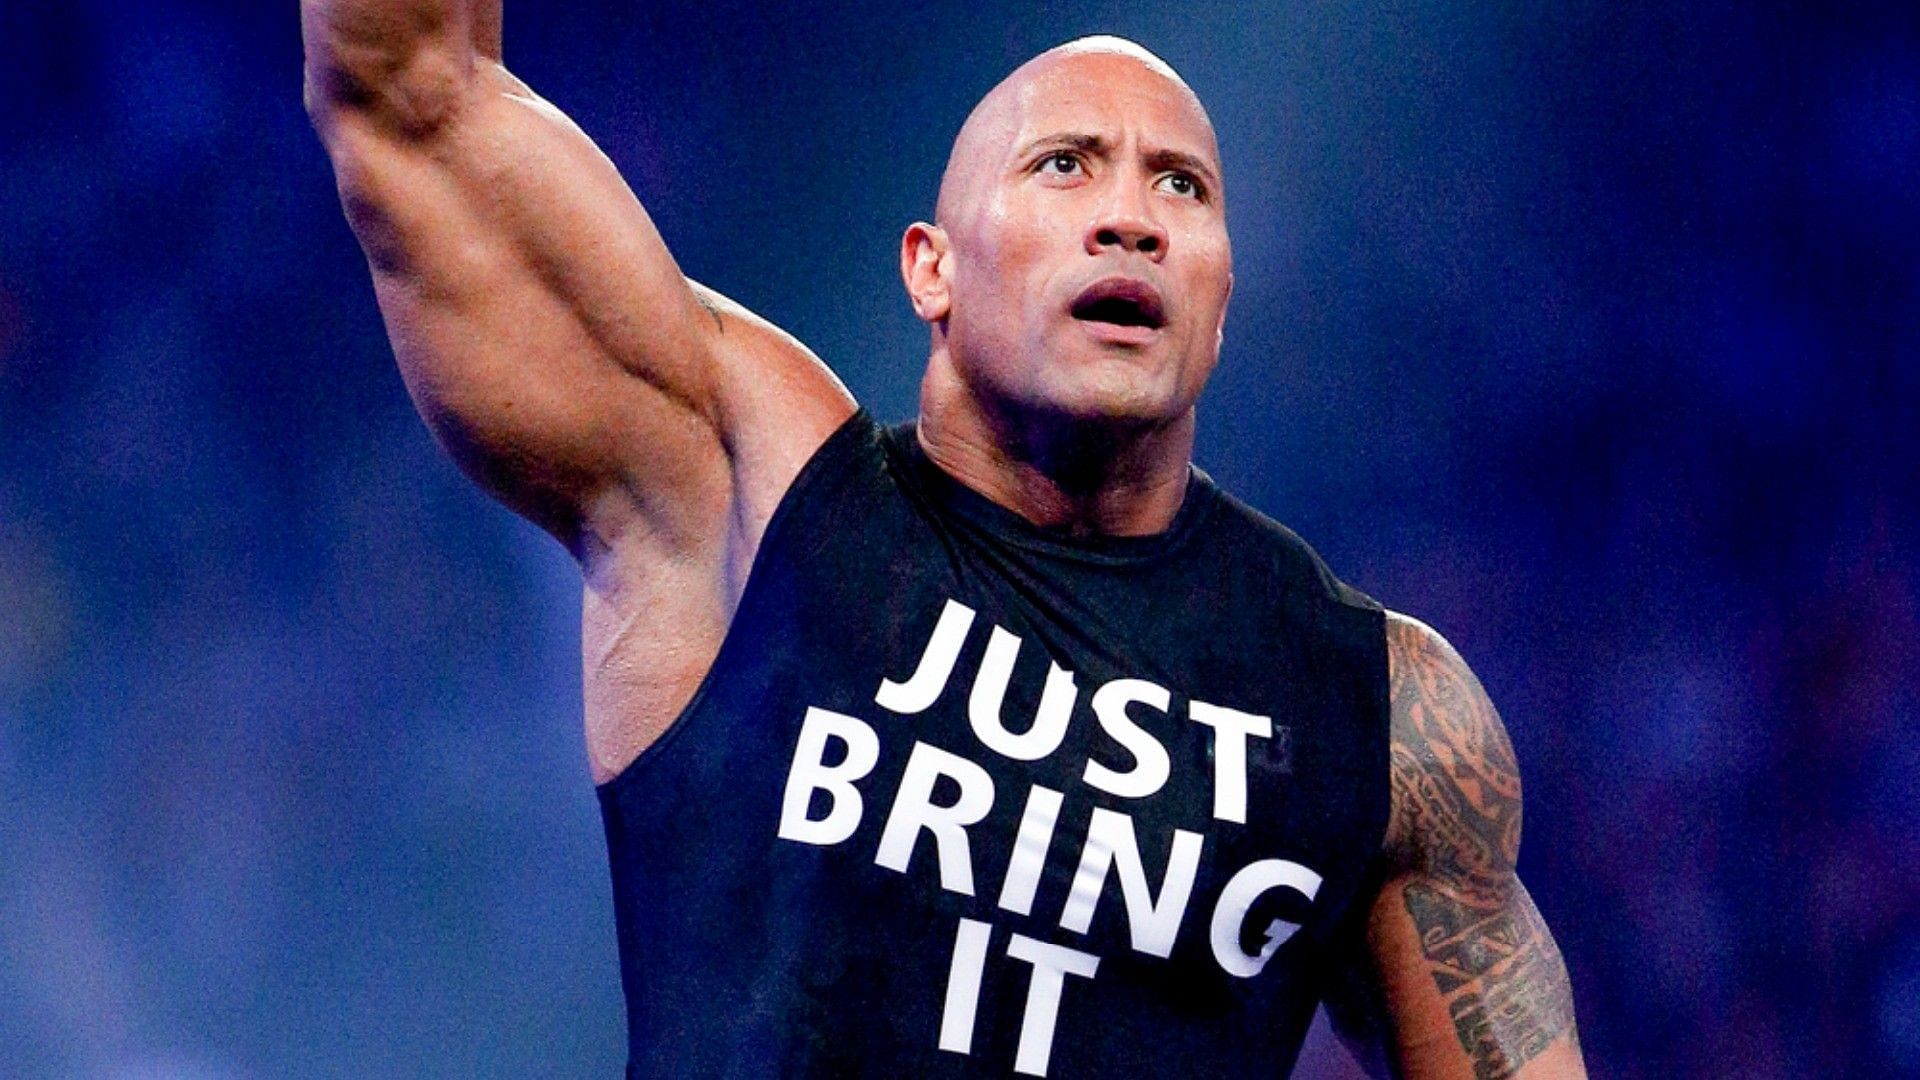 The Rock is one of the greatest WWE Superstars of all time